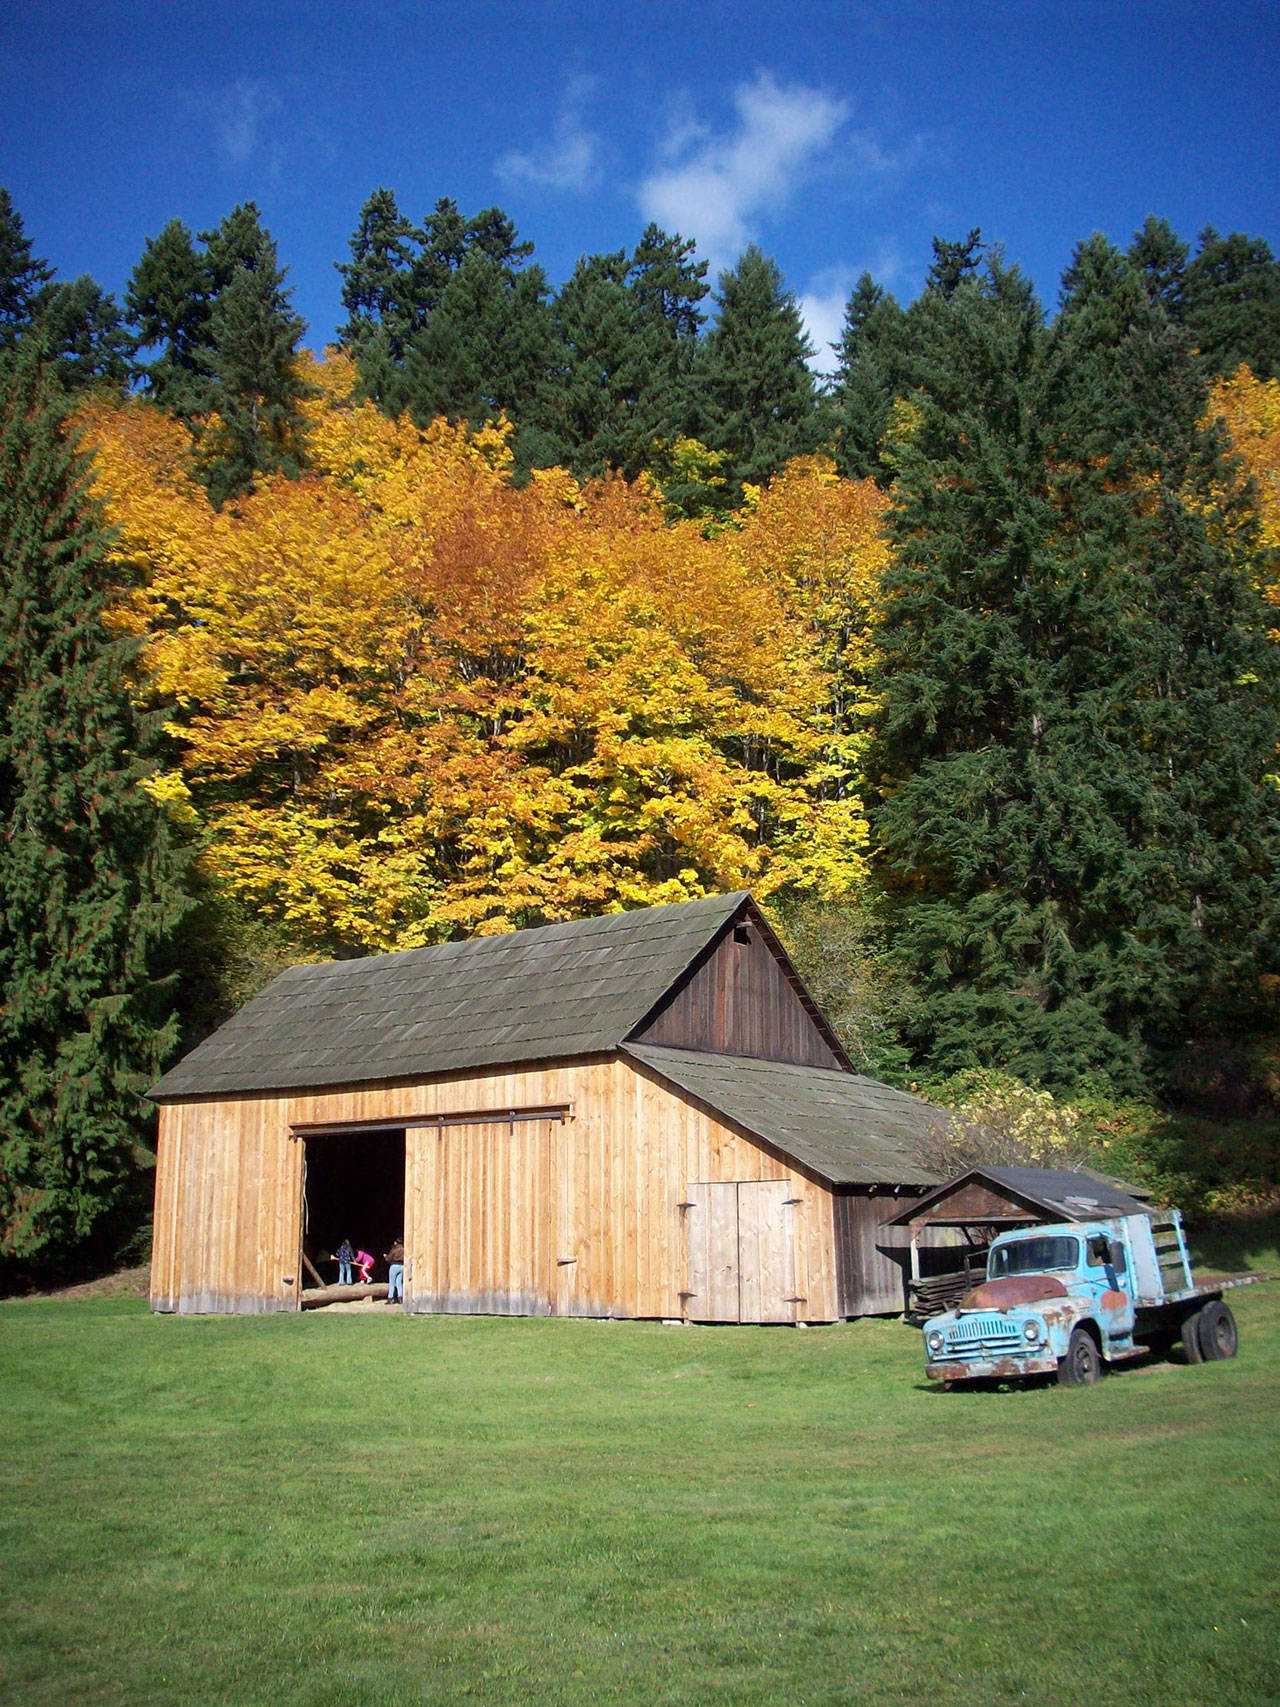 Beautiful Mary Olson Farm on Green River Road is operated as a partnership between the White River Valley Museum and the City of Auburn. It is said to be King County’s best preserved subsistence farm and has been fully restored. COURTESY PHOTO, WRVM